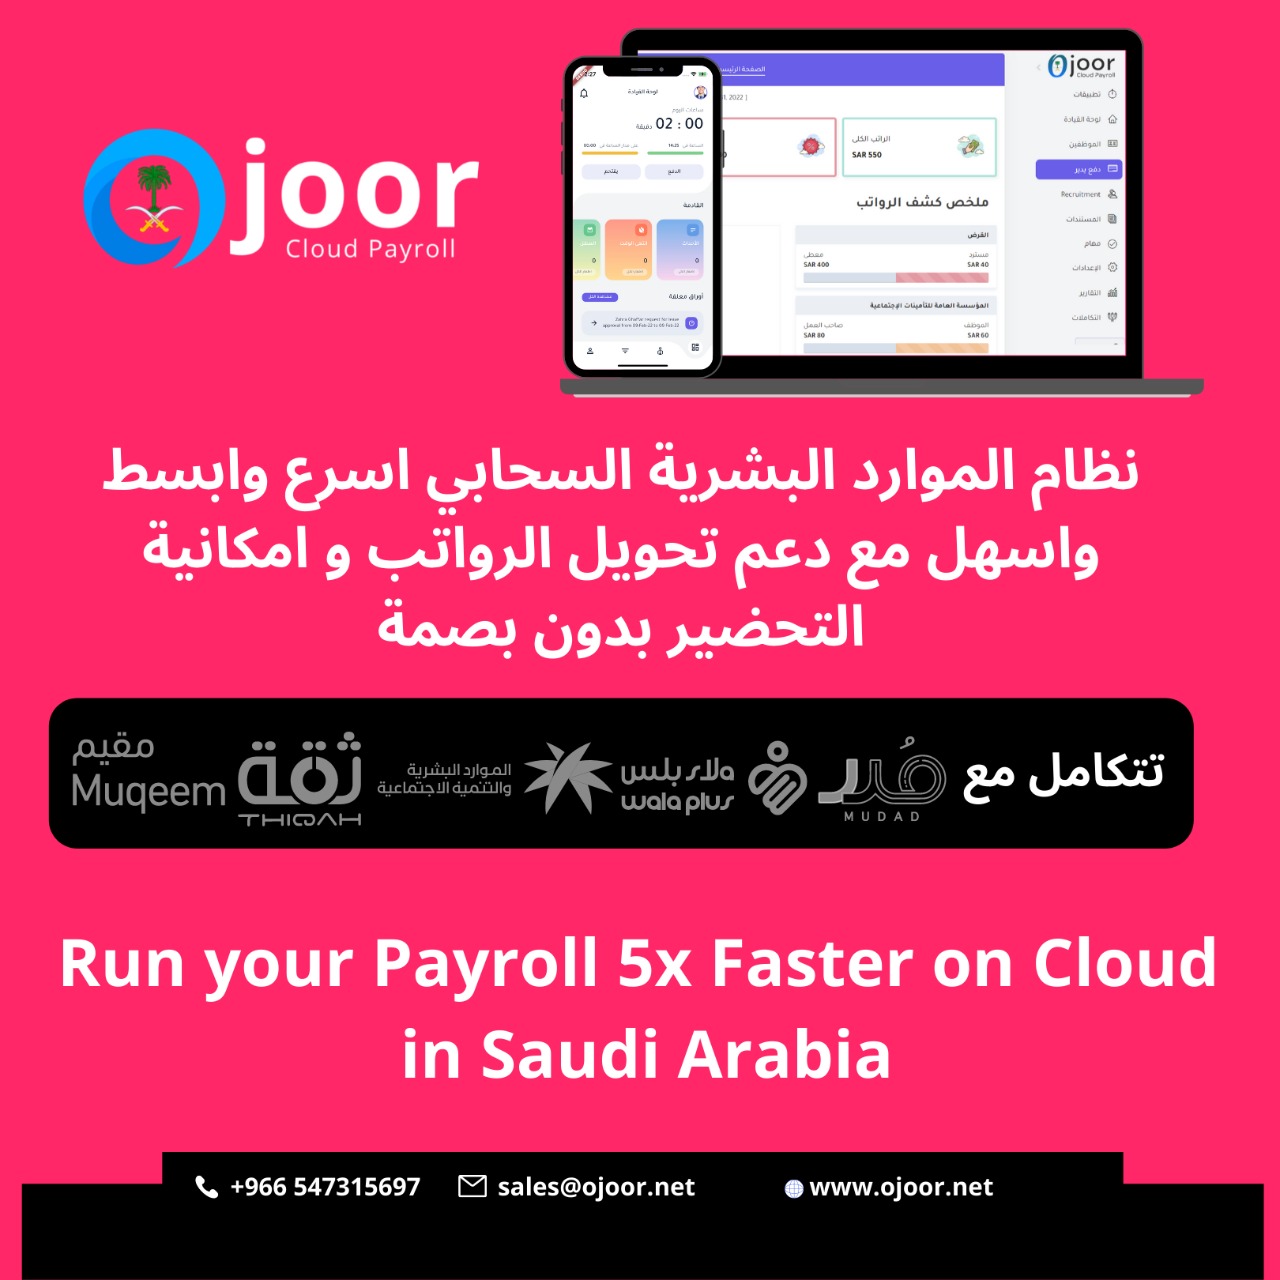 Which are the Benefits of having a Payroll System in Saudi Companies?